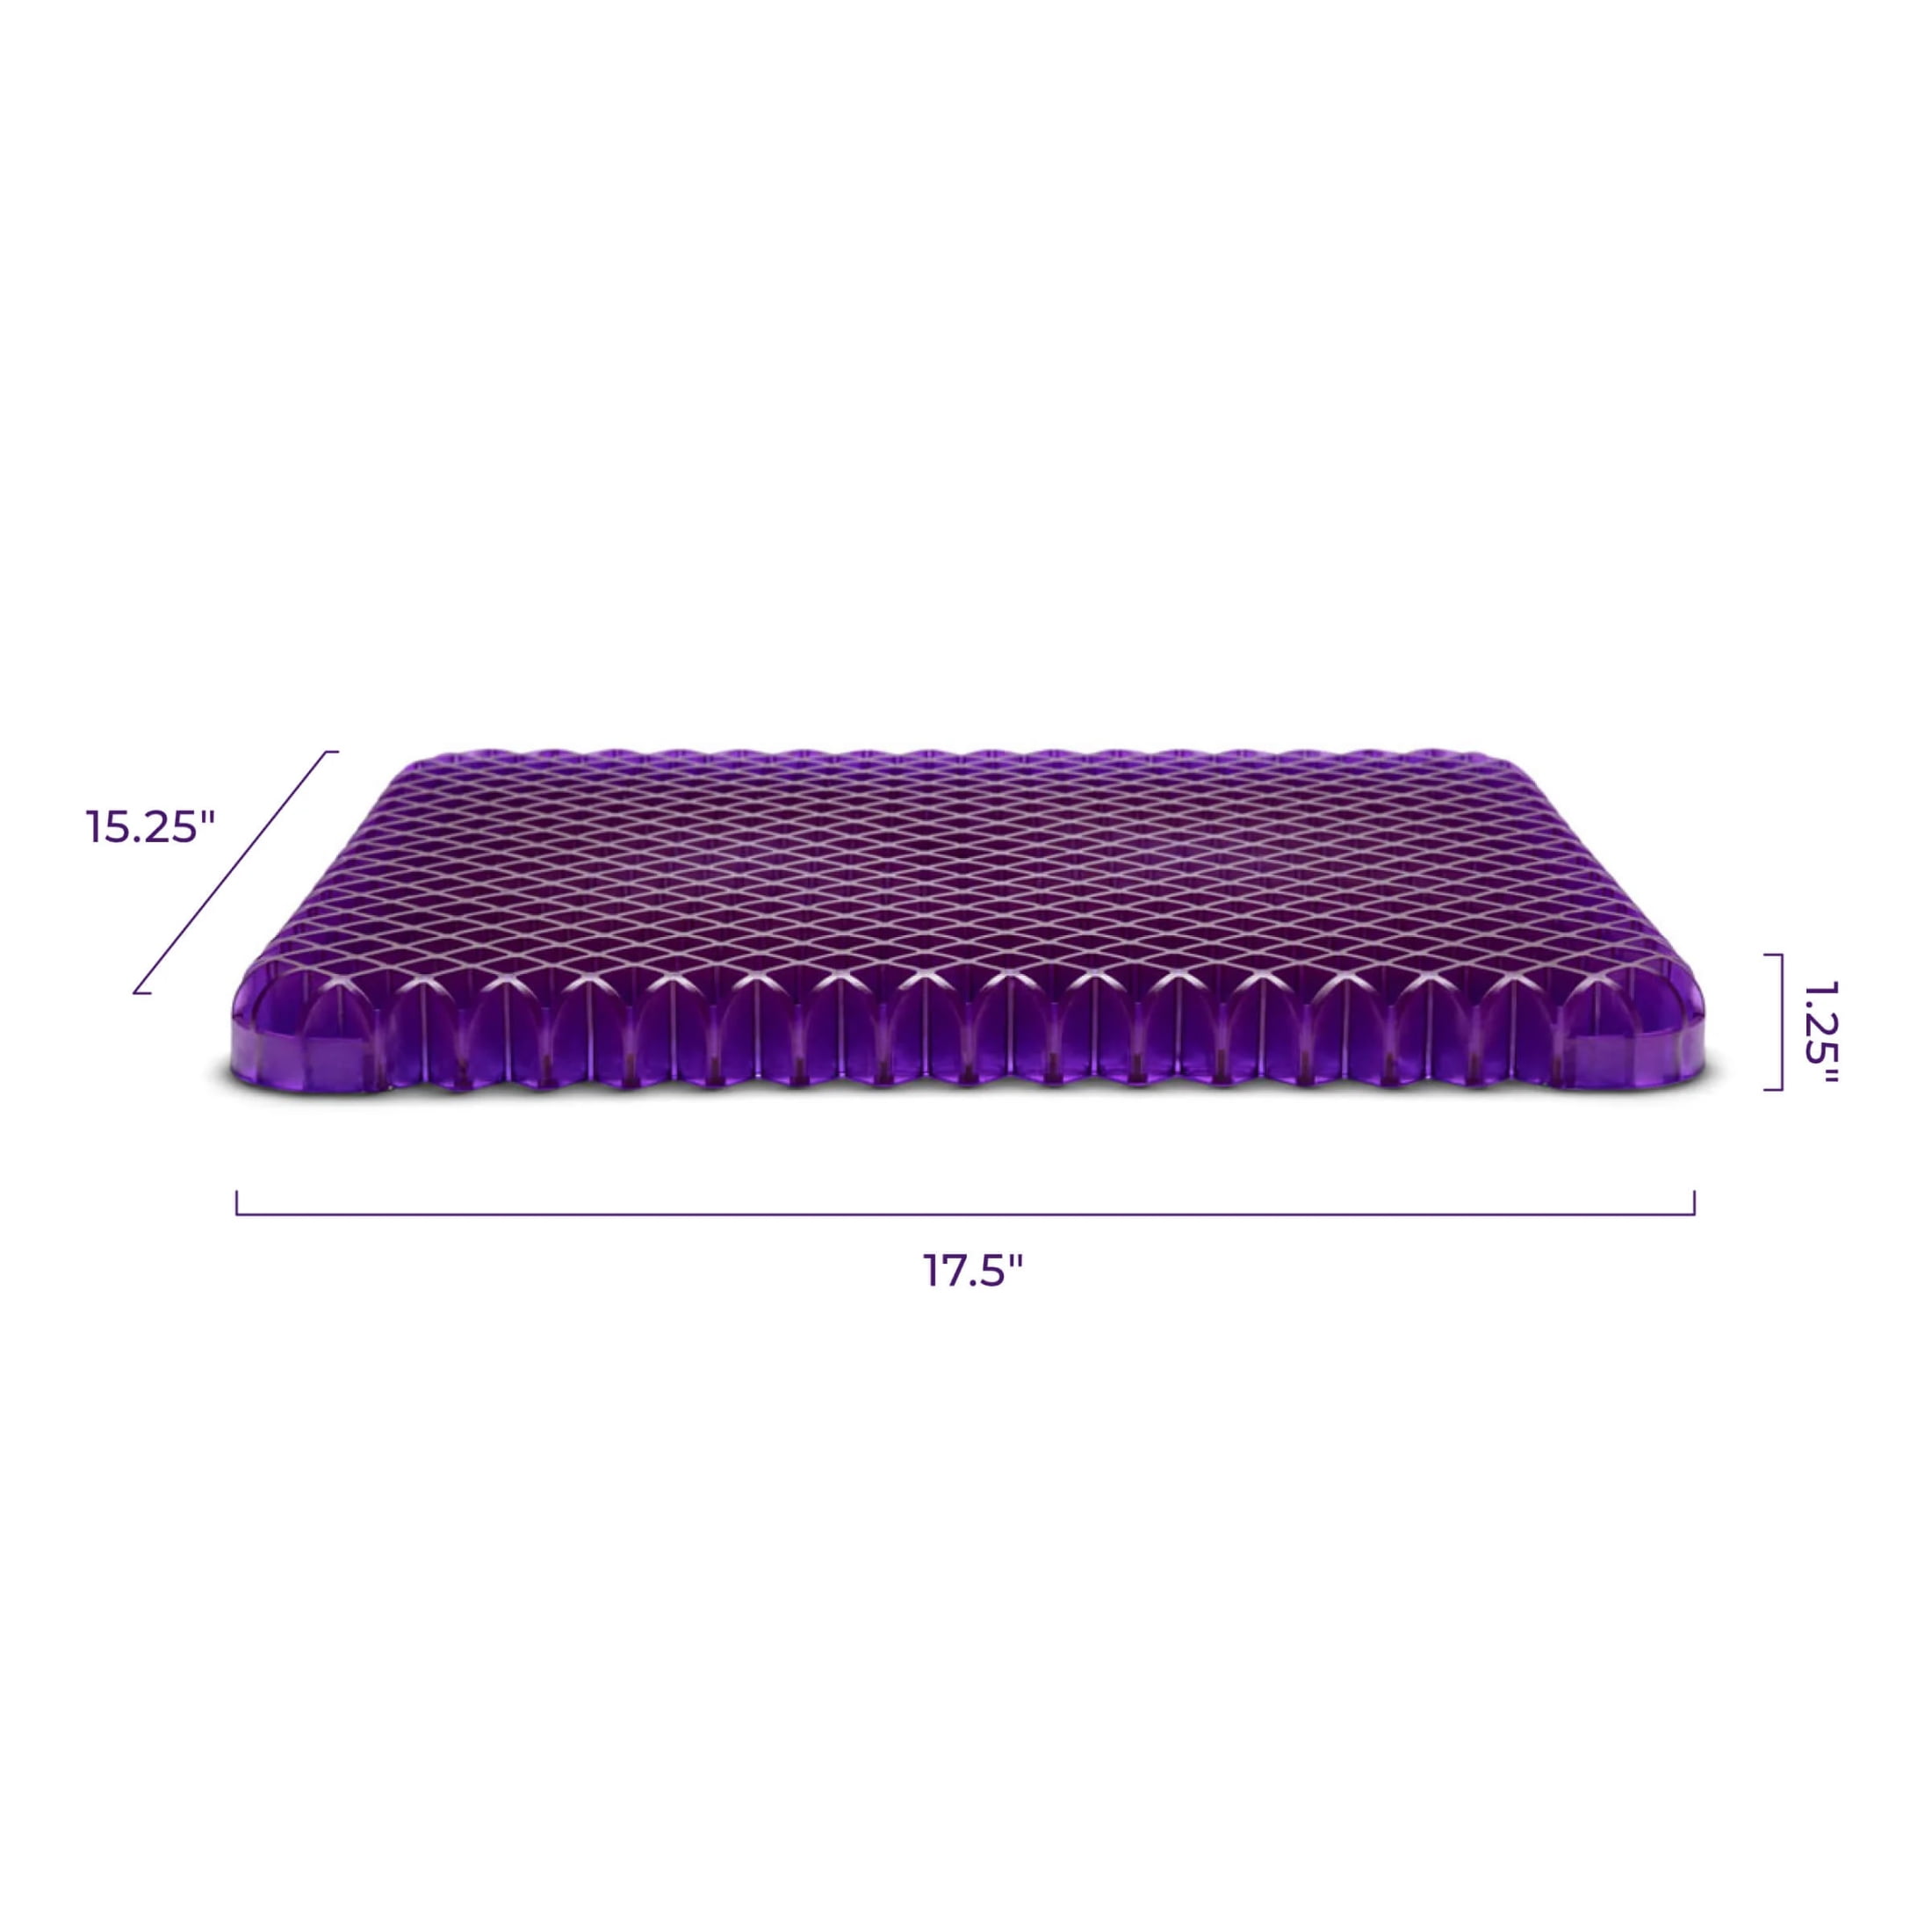 Purple Seat Cushion Review  A Smart Comfort Grid for your Fanny!